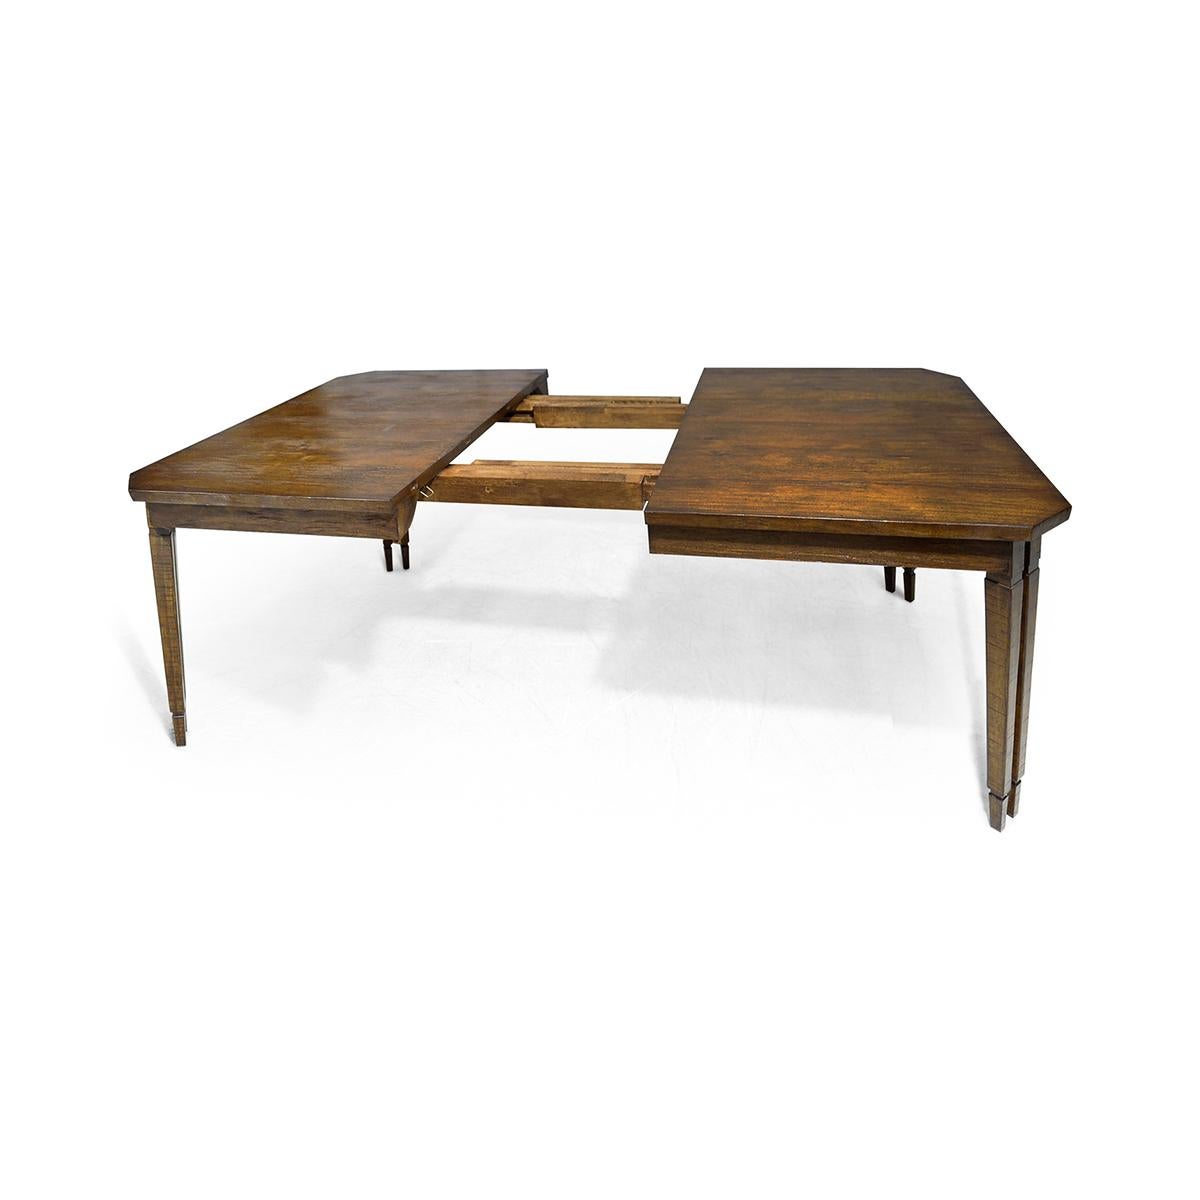 Rustic Country Walnut Extension Dining Table In New Condition For Sale In Westwood, NJ